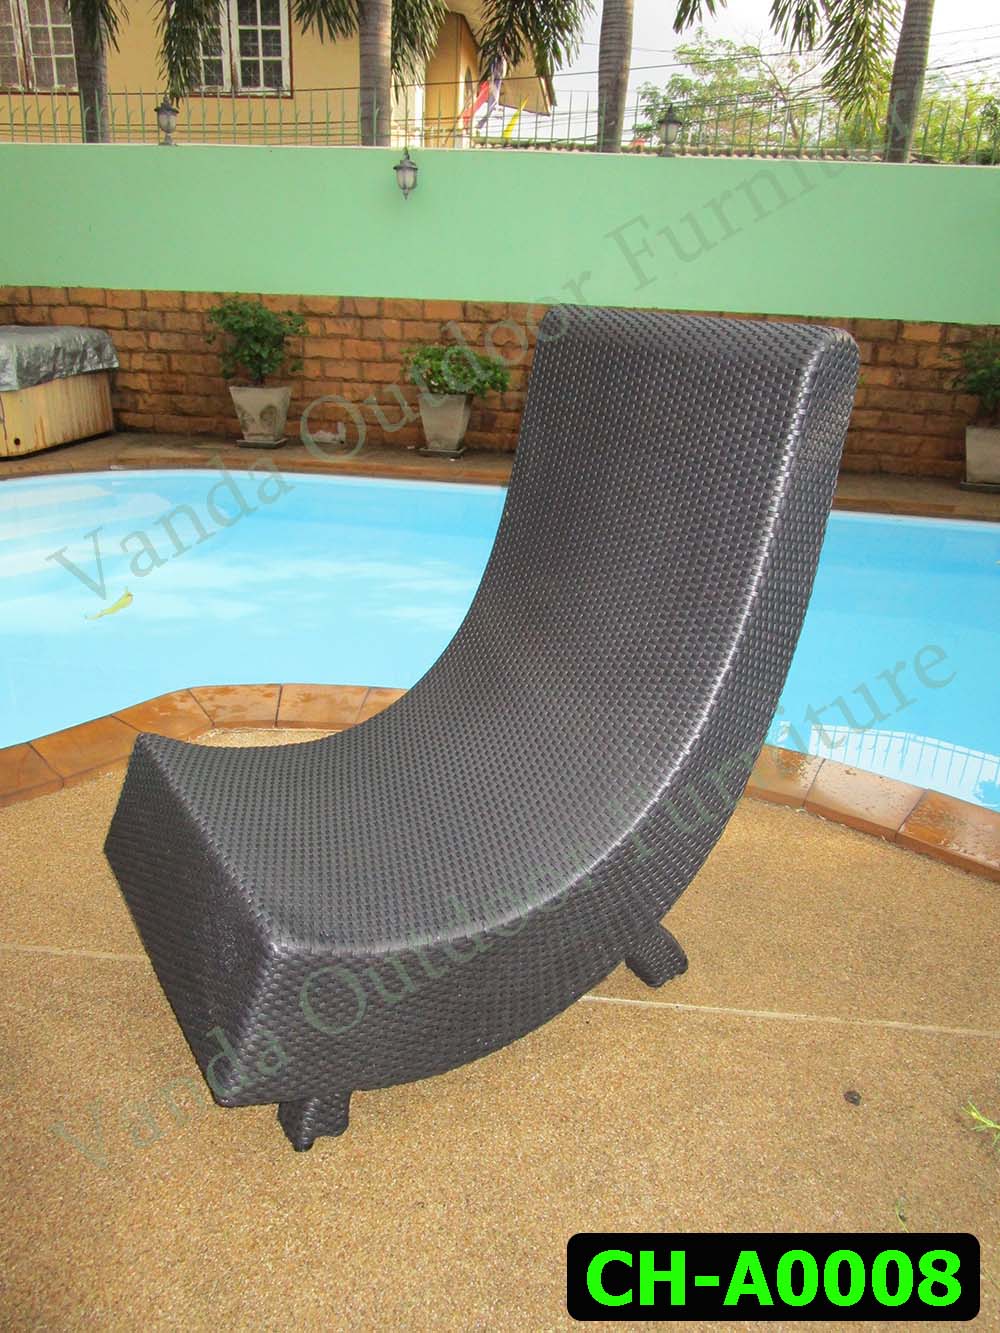 Rattan Chair Product code CH-A0008